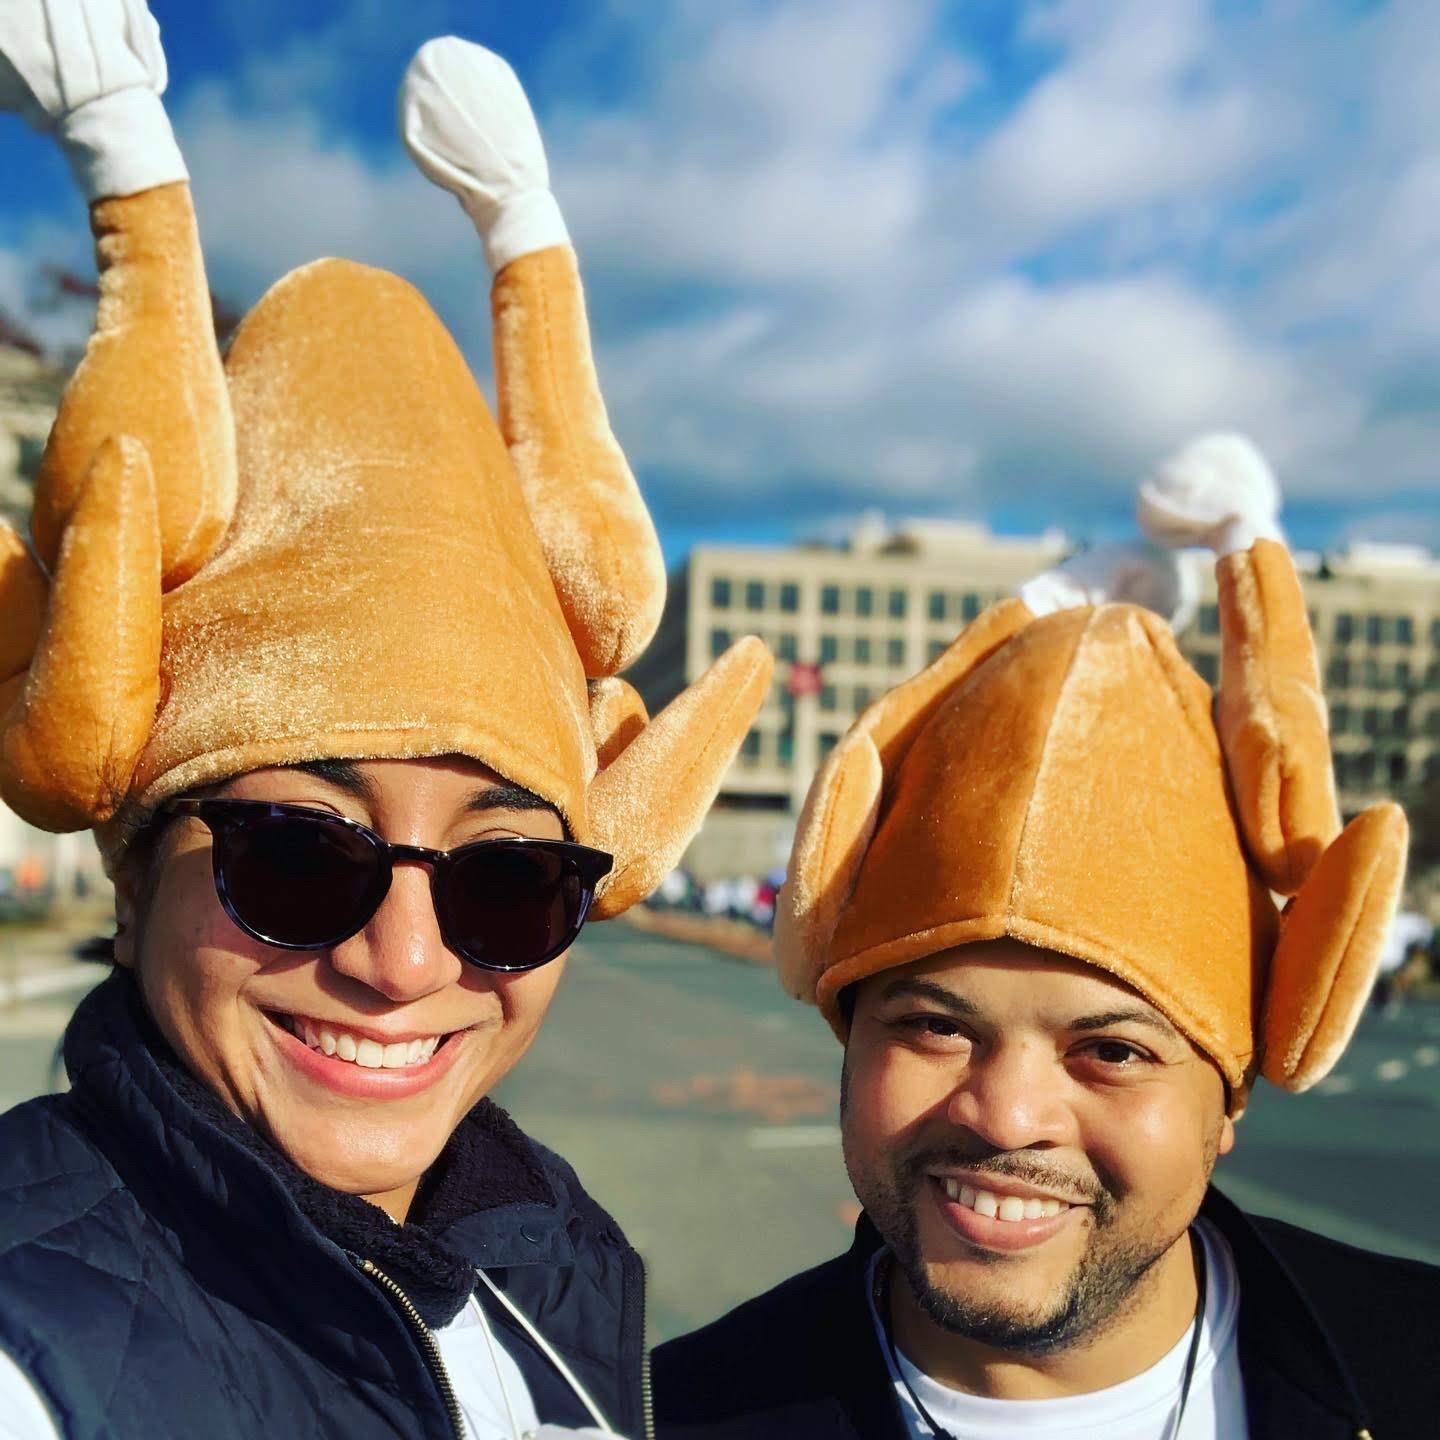 The best hats are Turkey hats!